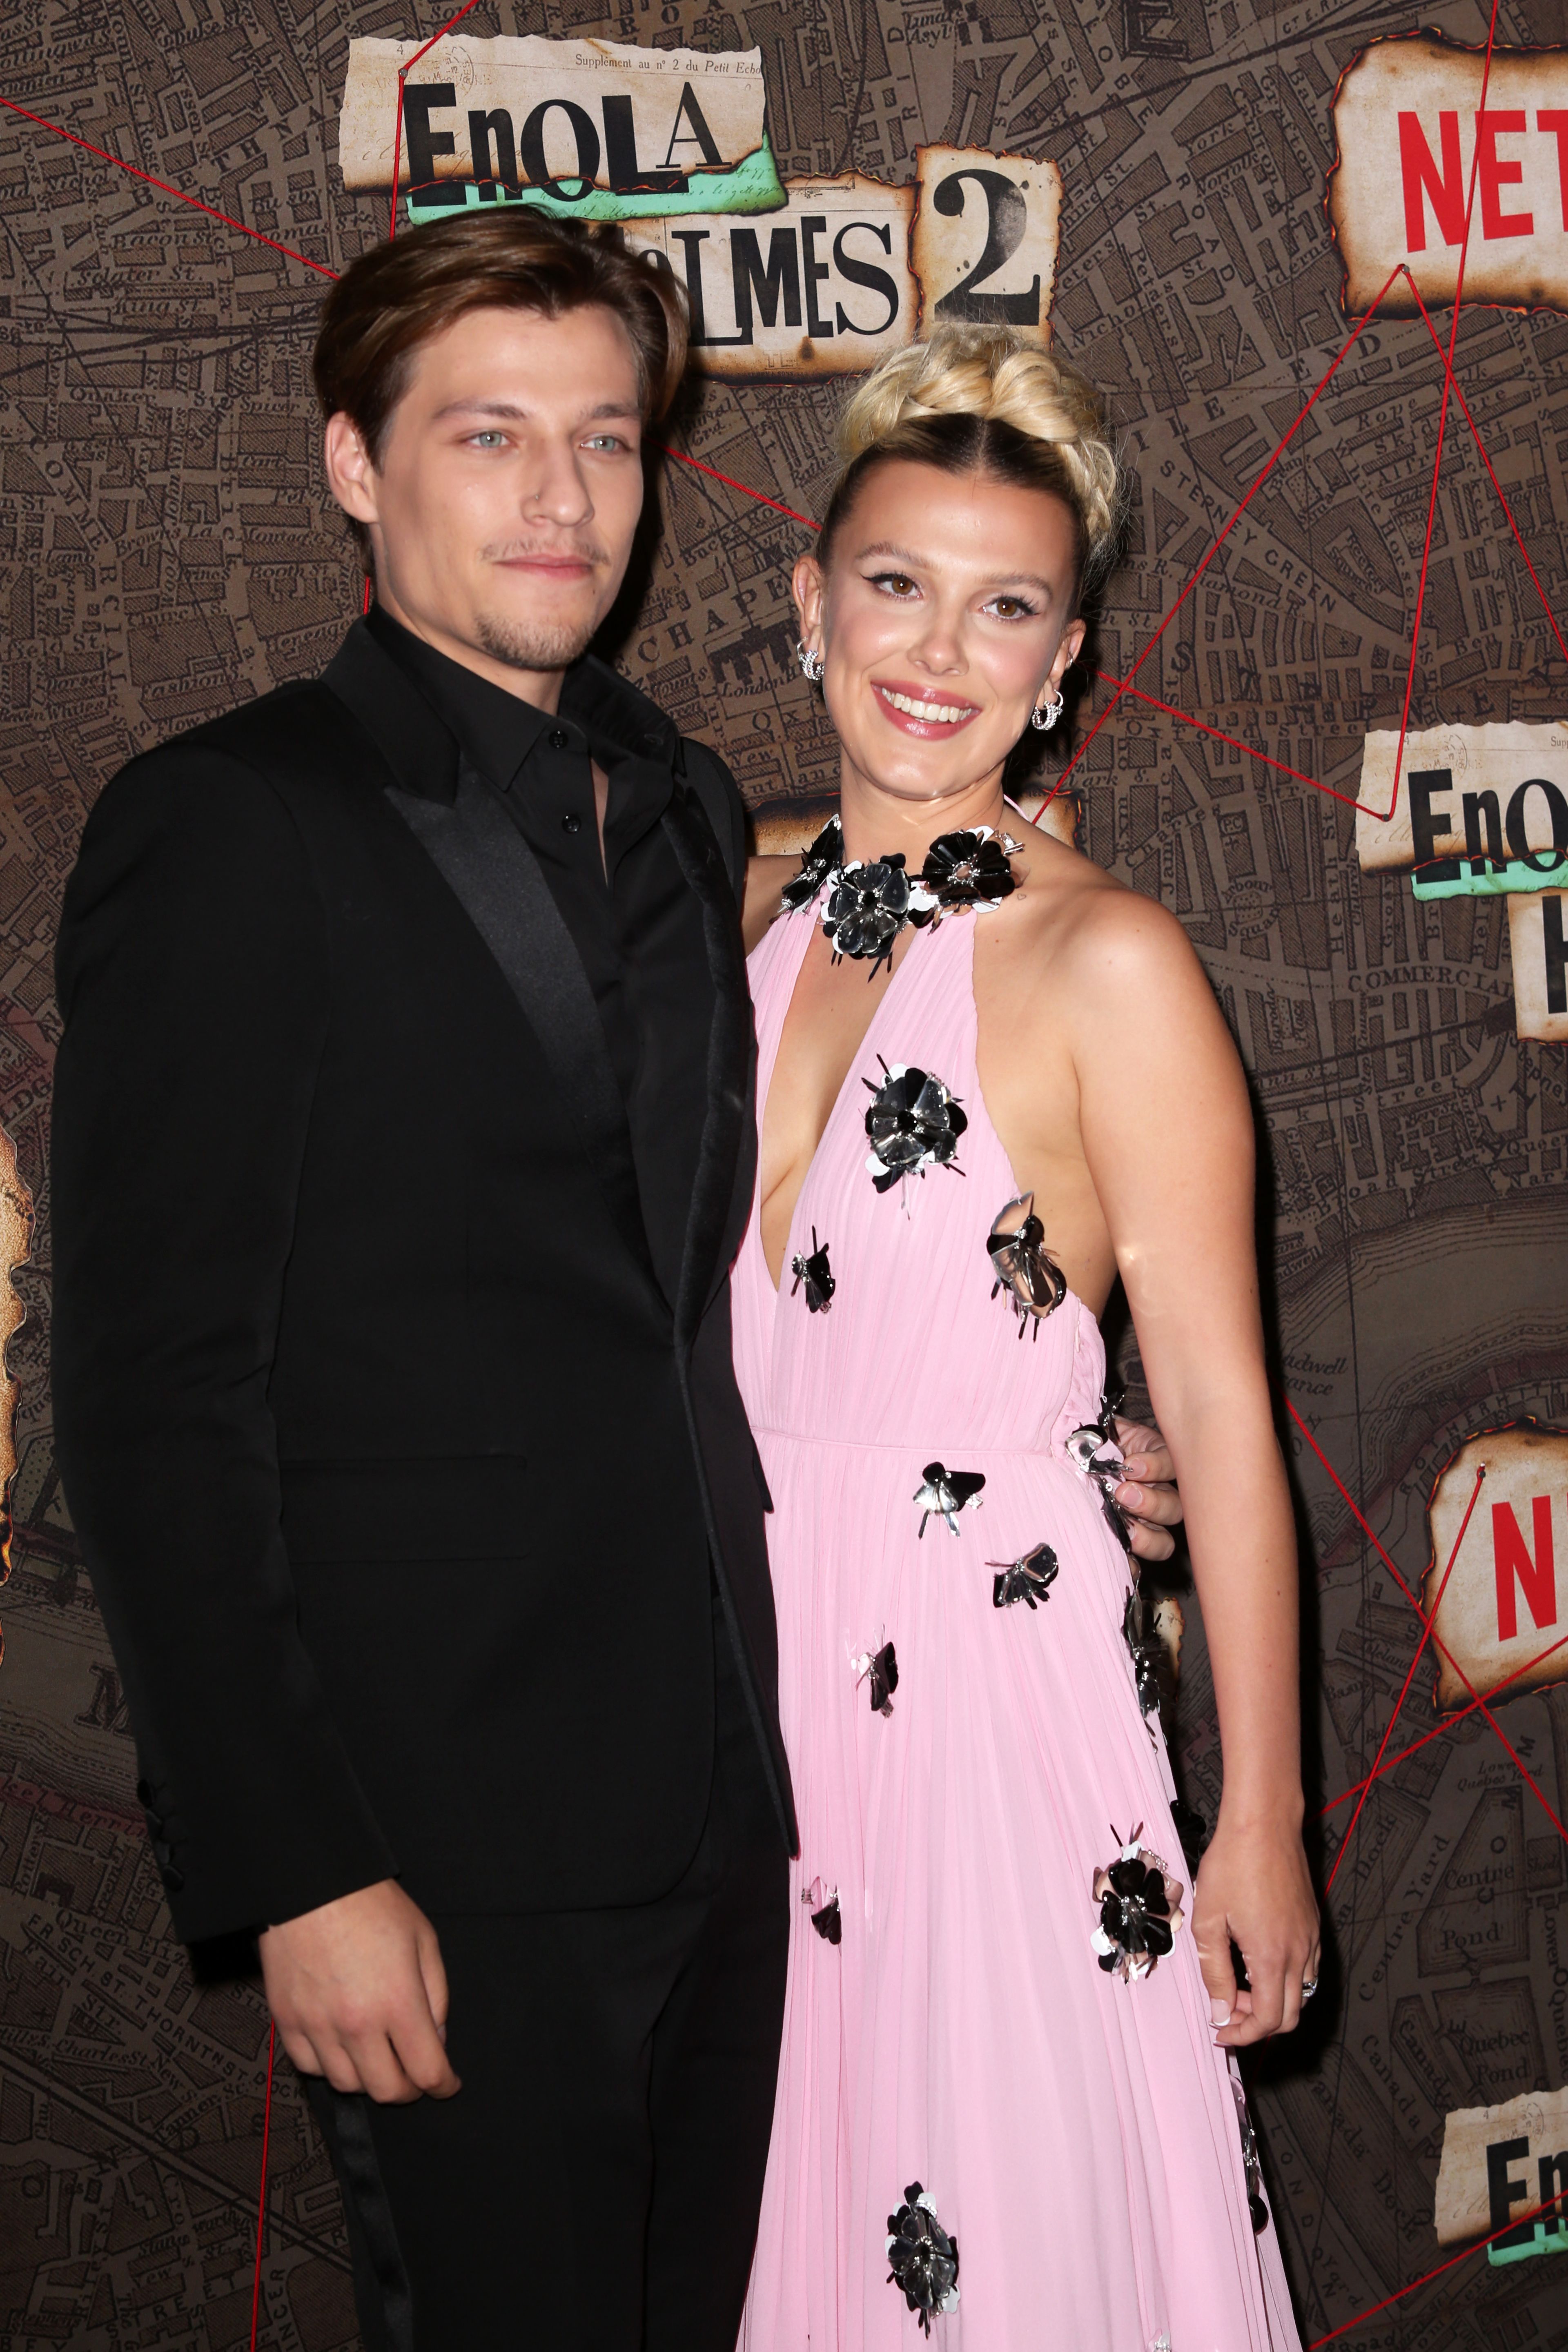 Millie Bobby Brown Stuns In A Pink Gown At The Premiere Of Enola Holmes 2